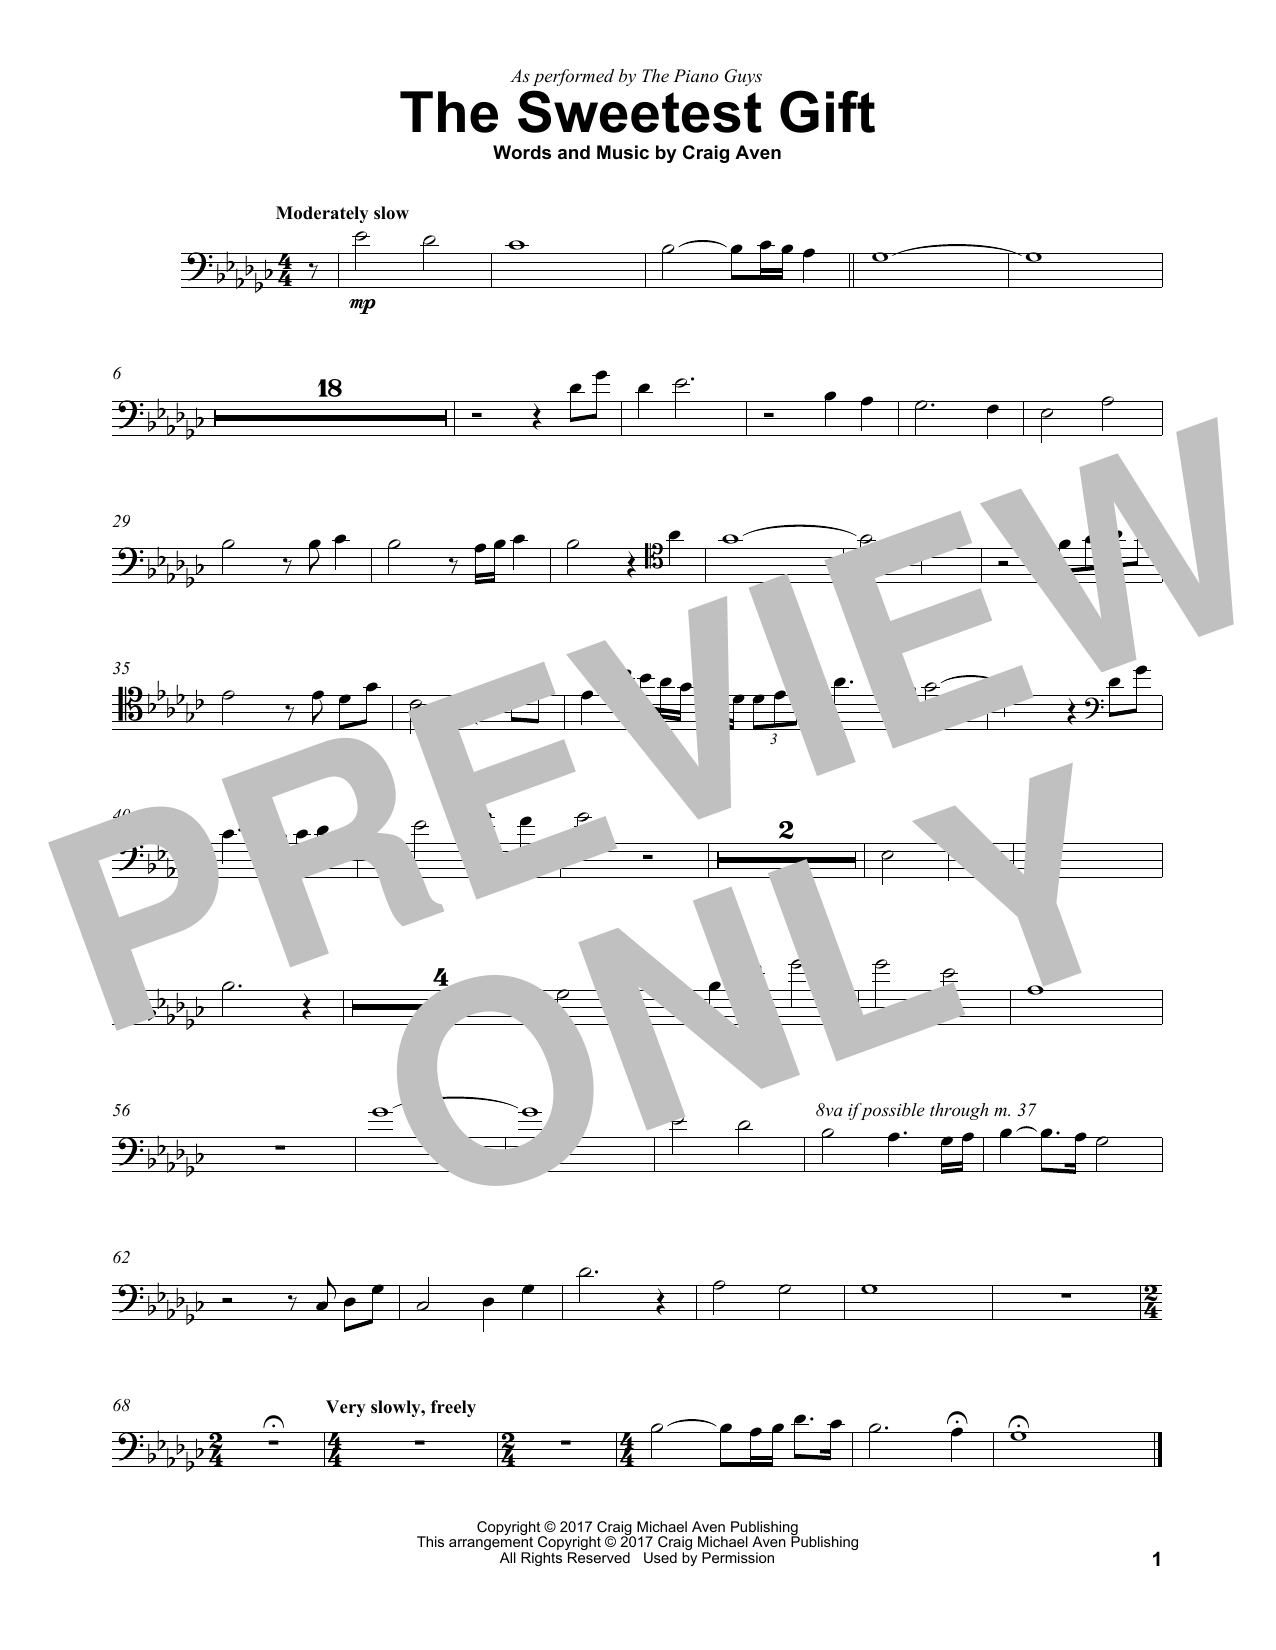 Download The Piano Guys The Sweetest Gift Sheet Music